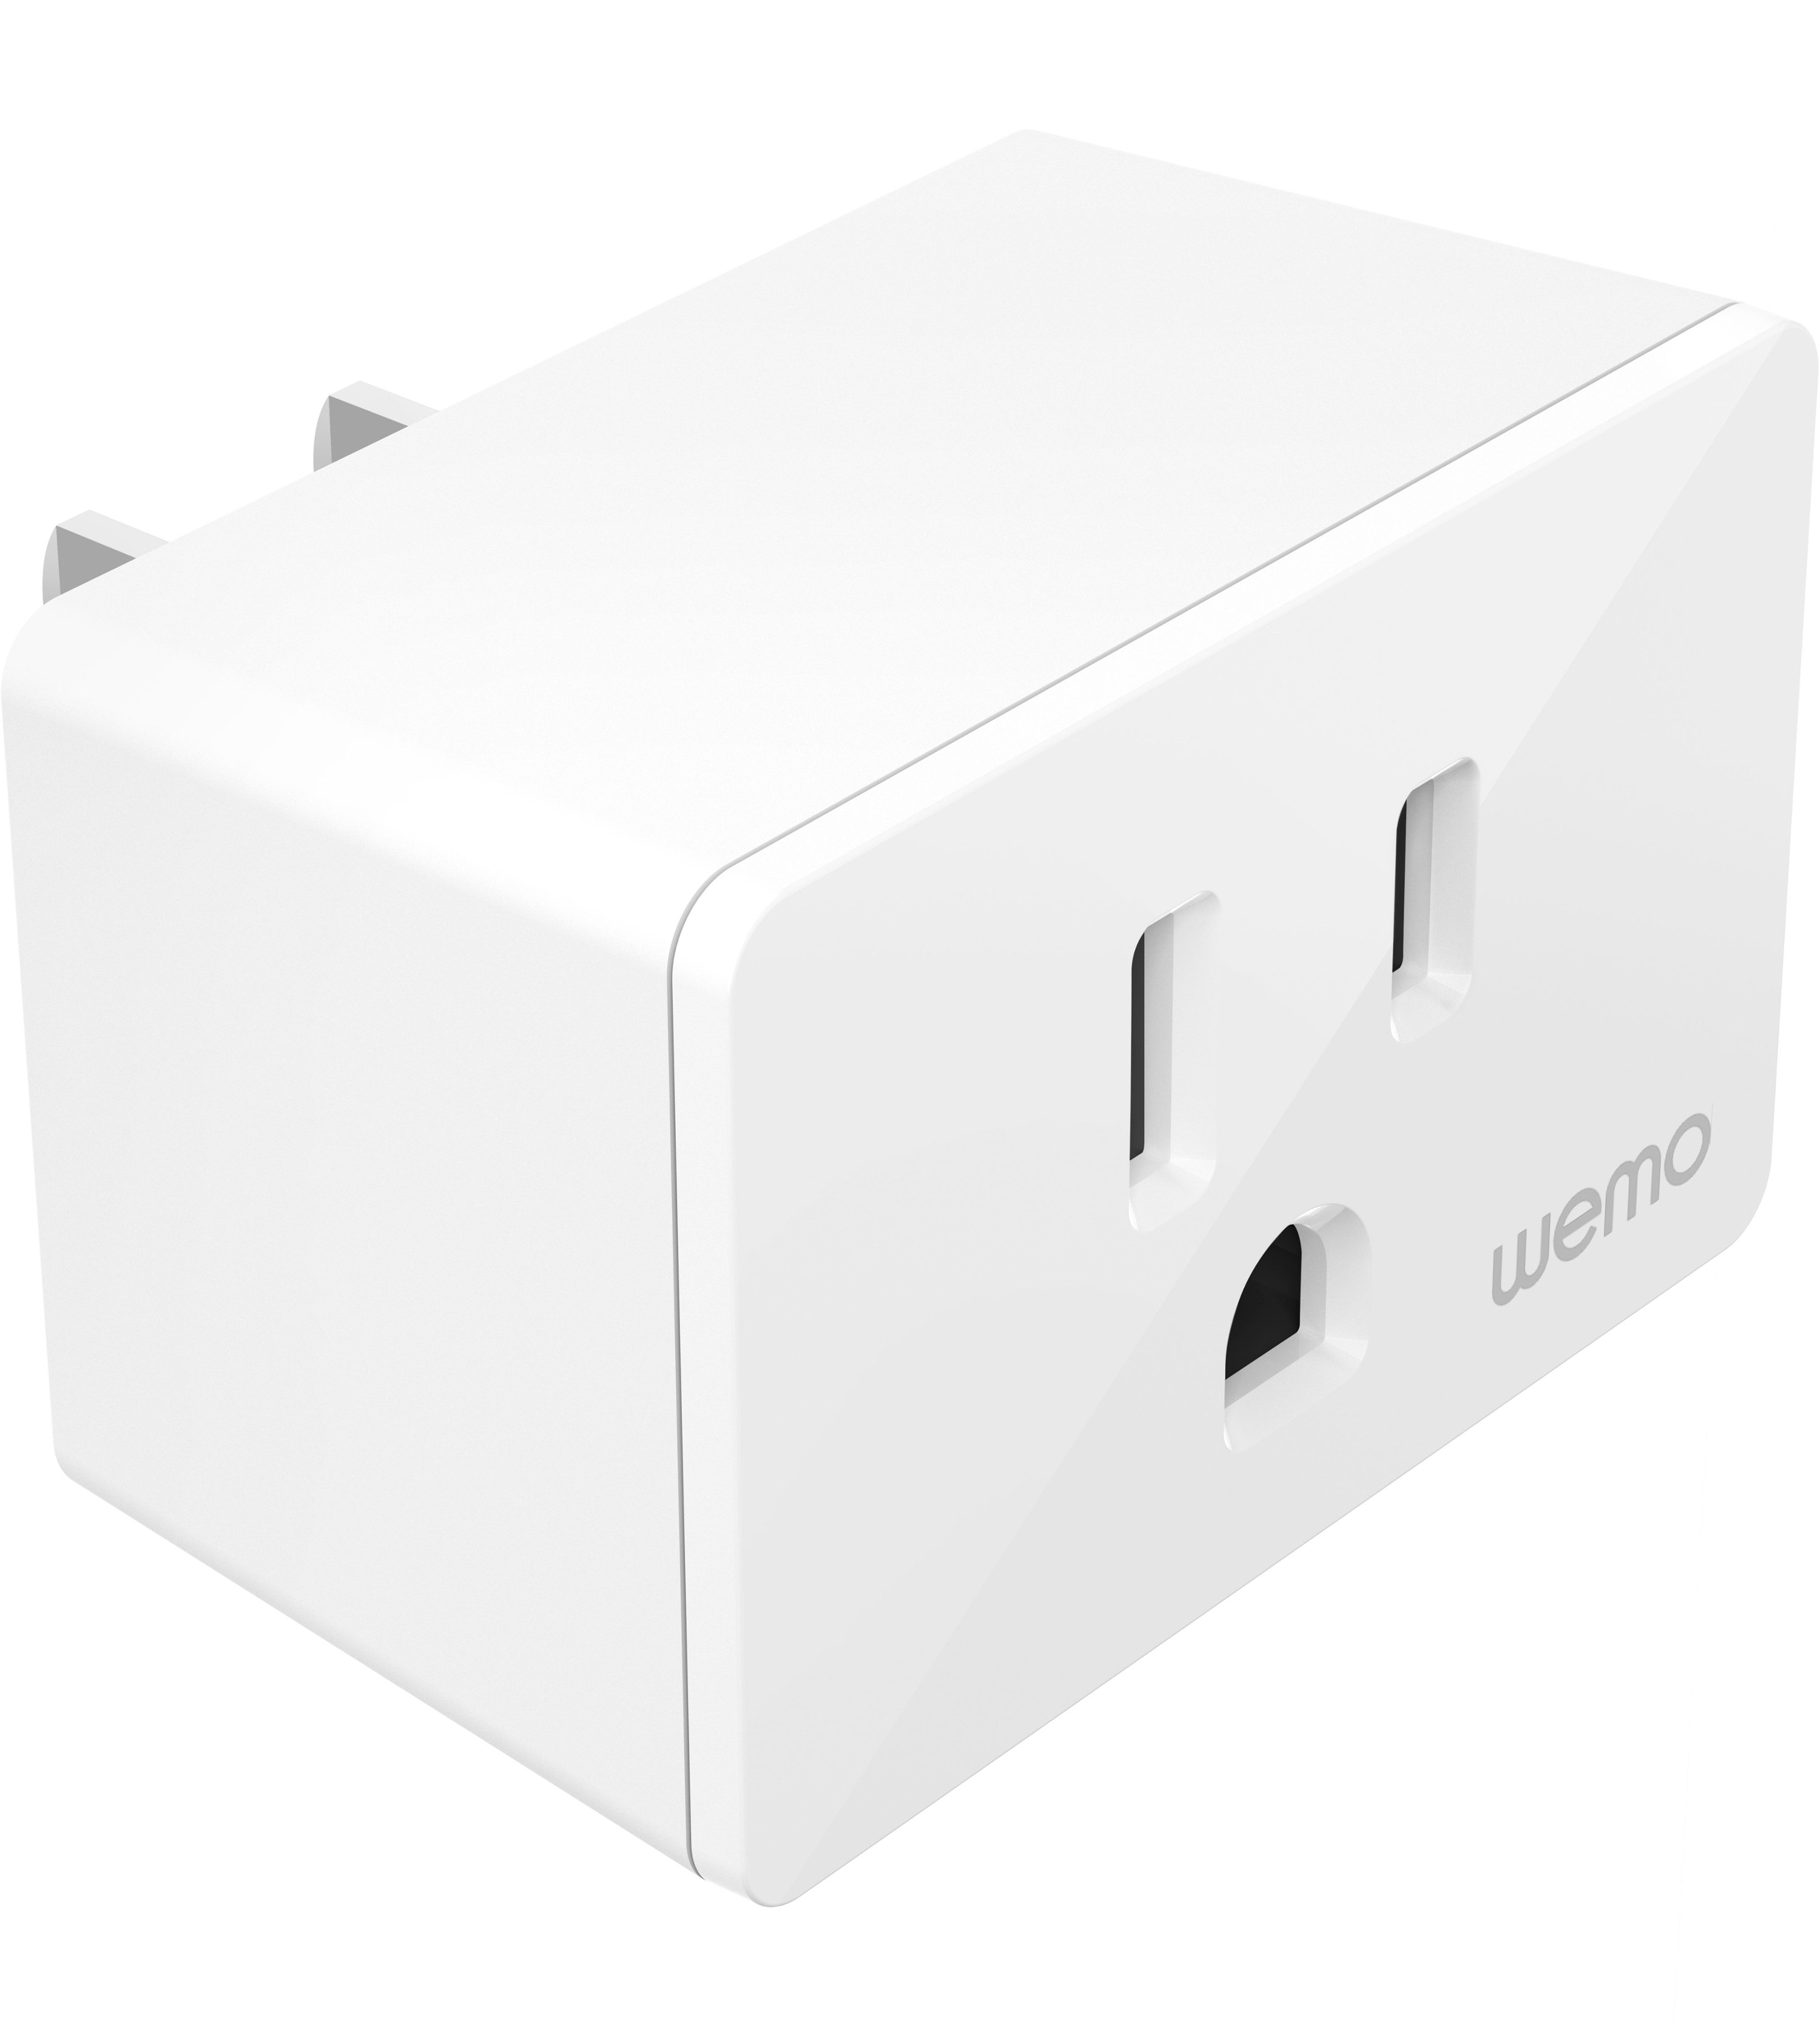  Wemo Insight WiFi Enabled Smart Plug, with Energy